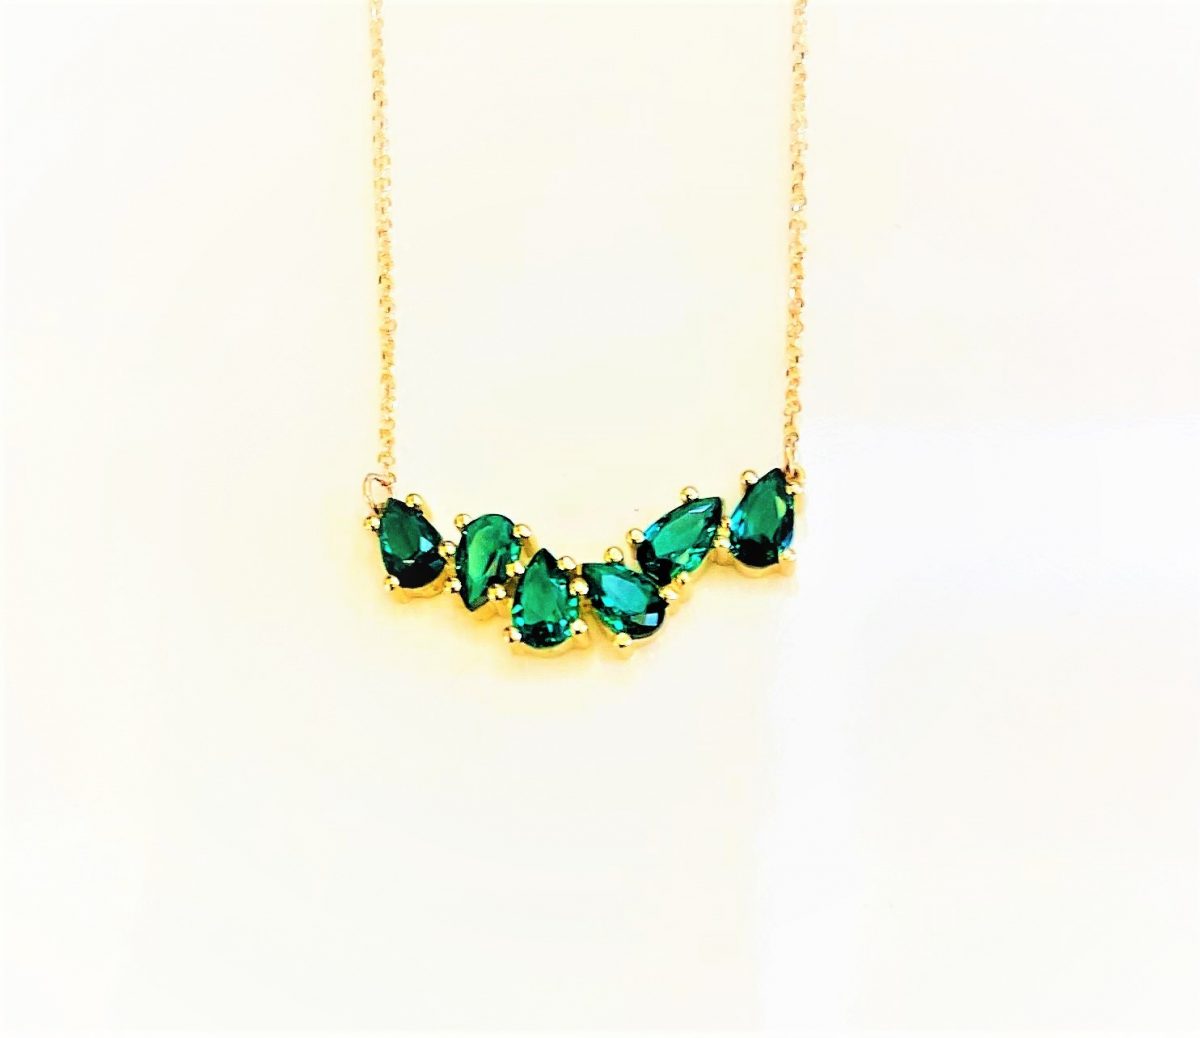 Women's necklace with green stones